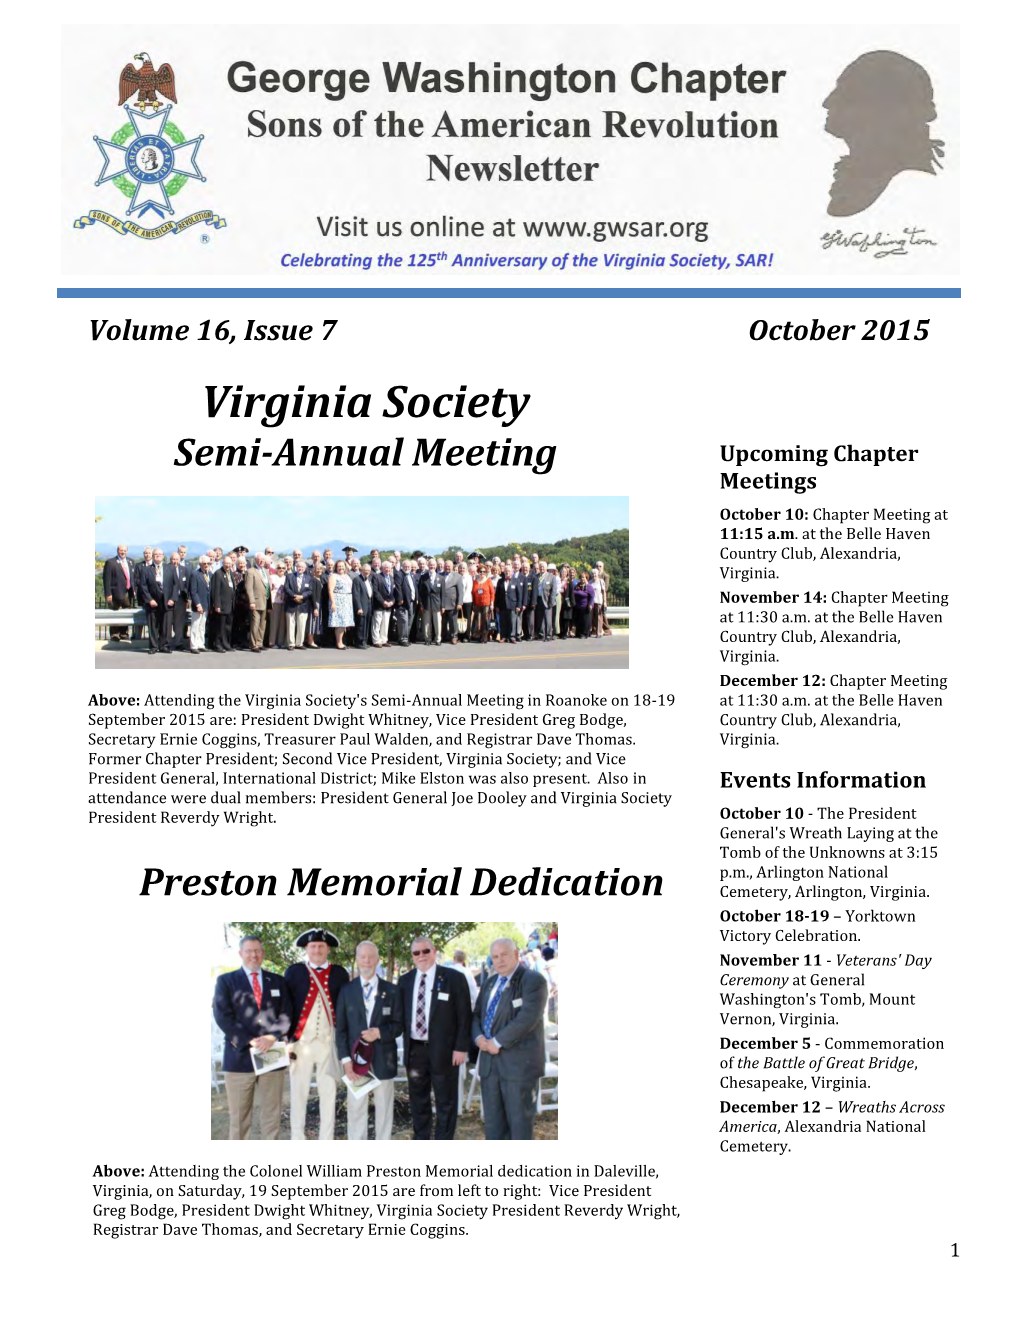 Virginia Society Semi-Annual Meeting Upcoming Chapter Meetings October 10: Chapter Meeting at 11:15 A.M